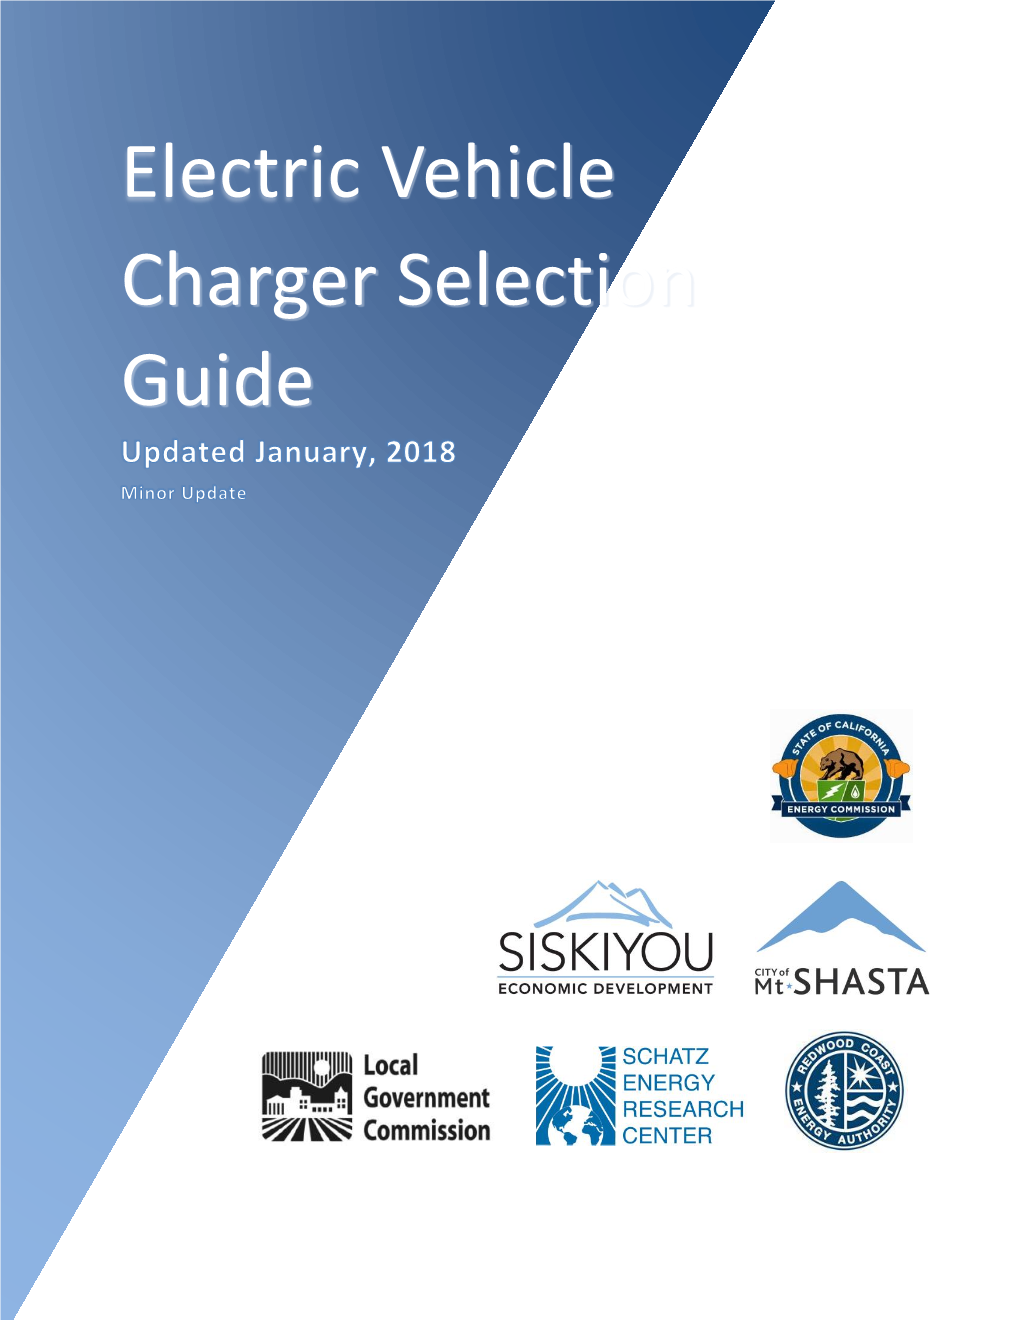 Electric Vehicle Charger Selection Guide